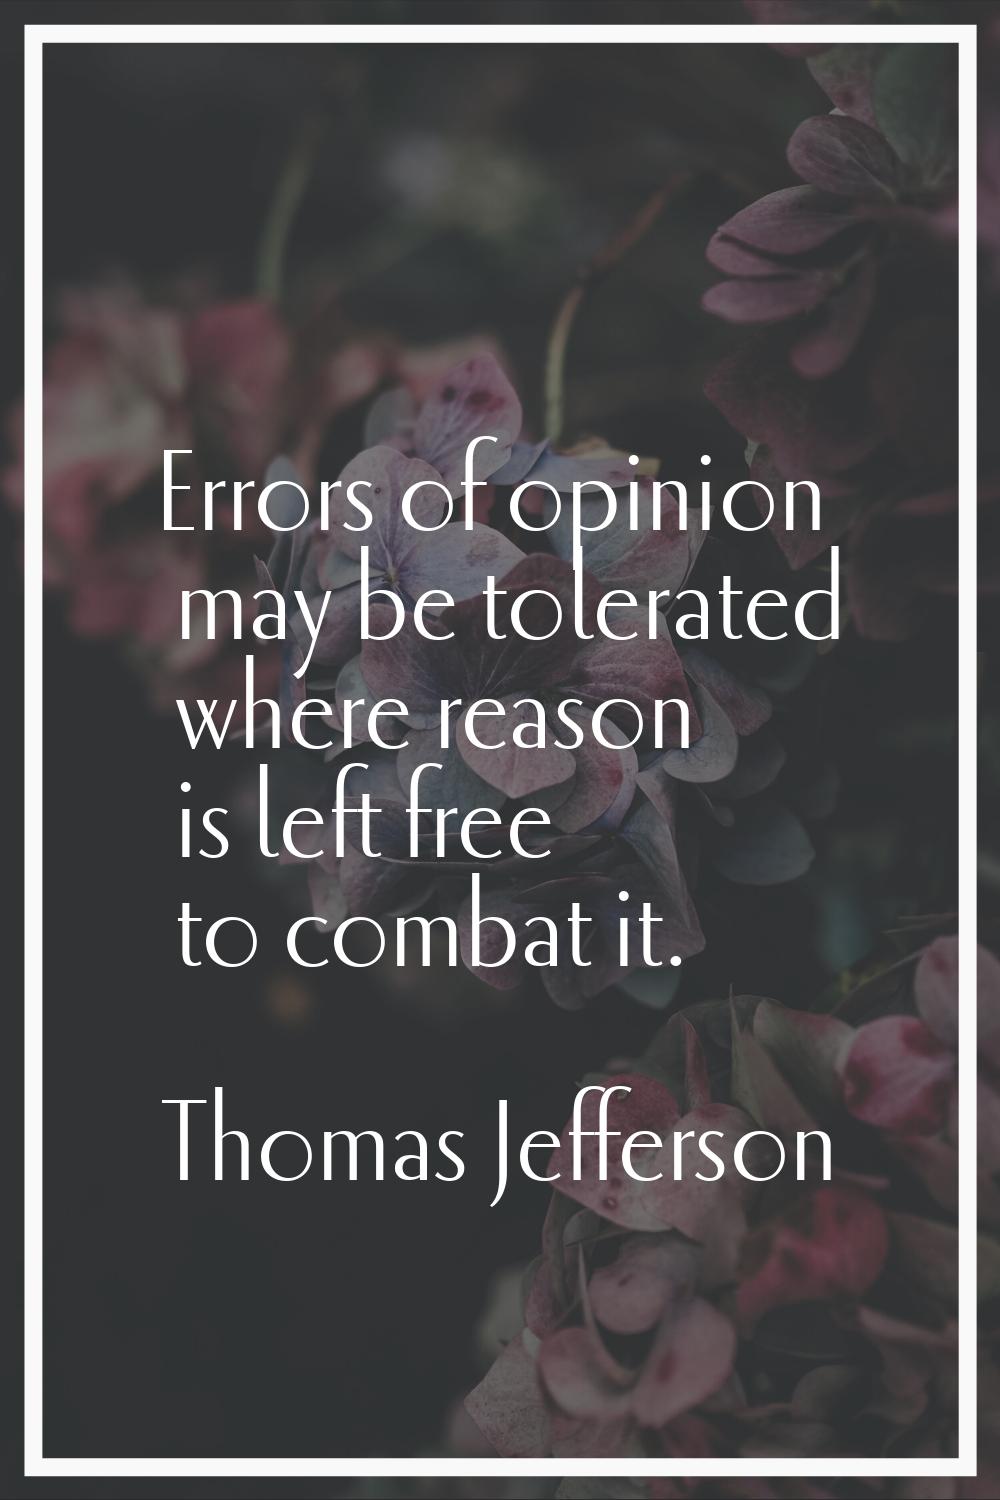 Errors of opinion may be tolerated where reason is left free to combat it.